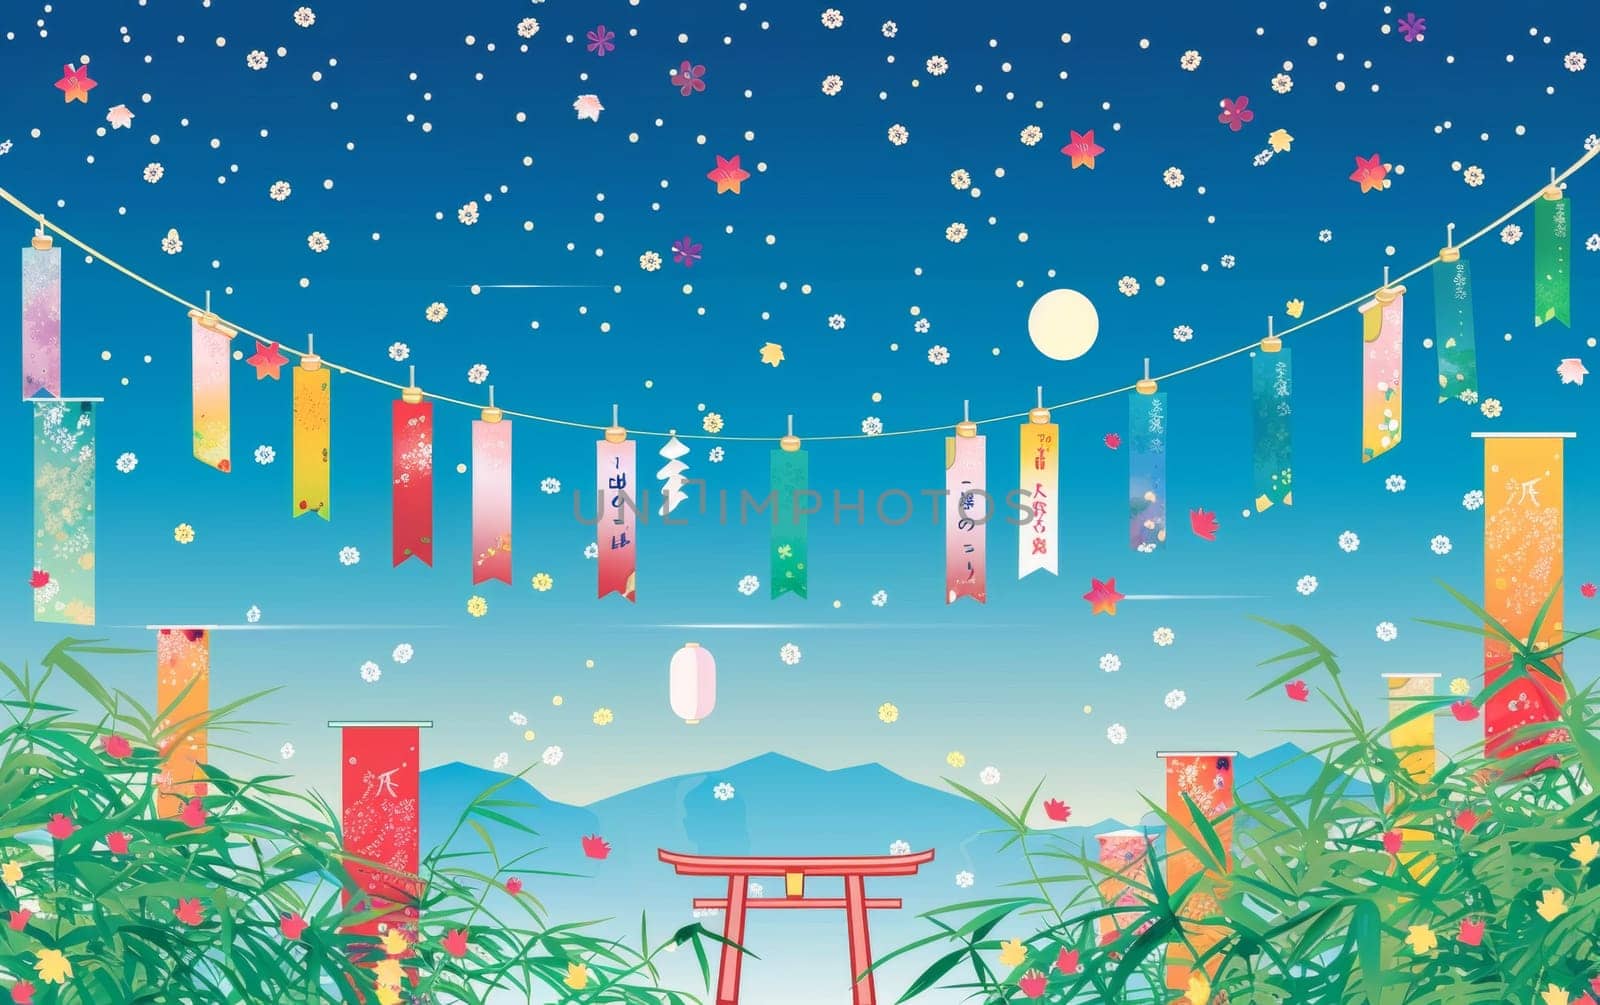 Vibrant Tanabata festival illustration with colorful streamers, Japanese text, and fireworks on a blue sky background. by sfinks